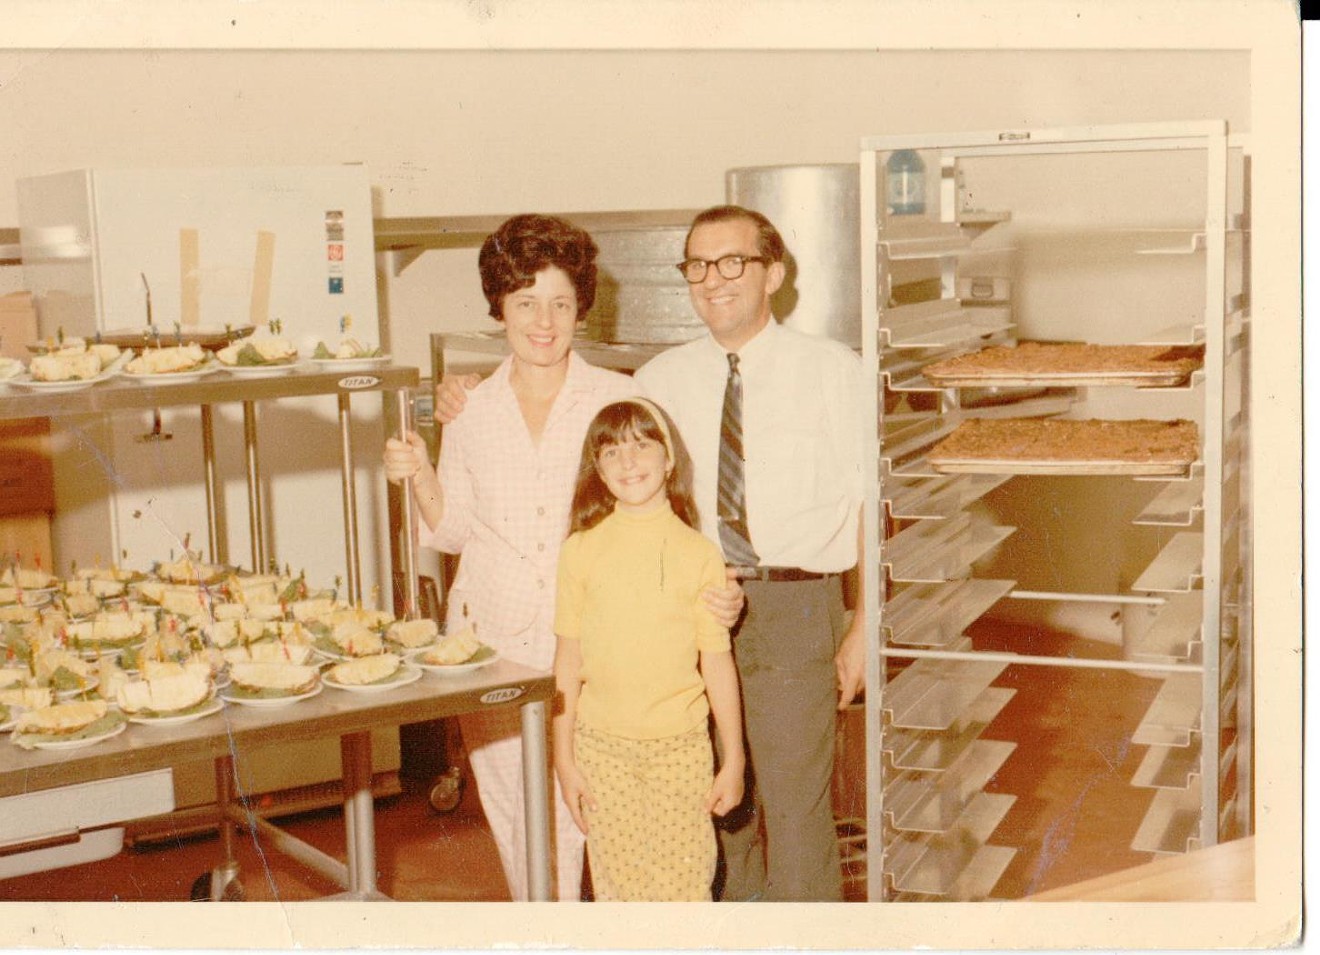 Miracle Mile Deli founder Jack Grodzinsky, his wife Eleanor and their daughter Jill at the former Park Central Mall location, circa 1969. This year, the family-run business celebrates its 75th anniversary.